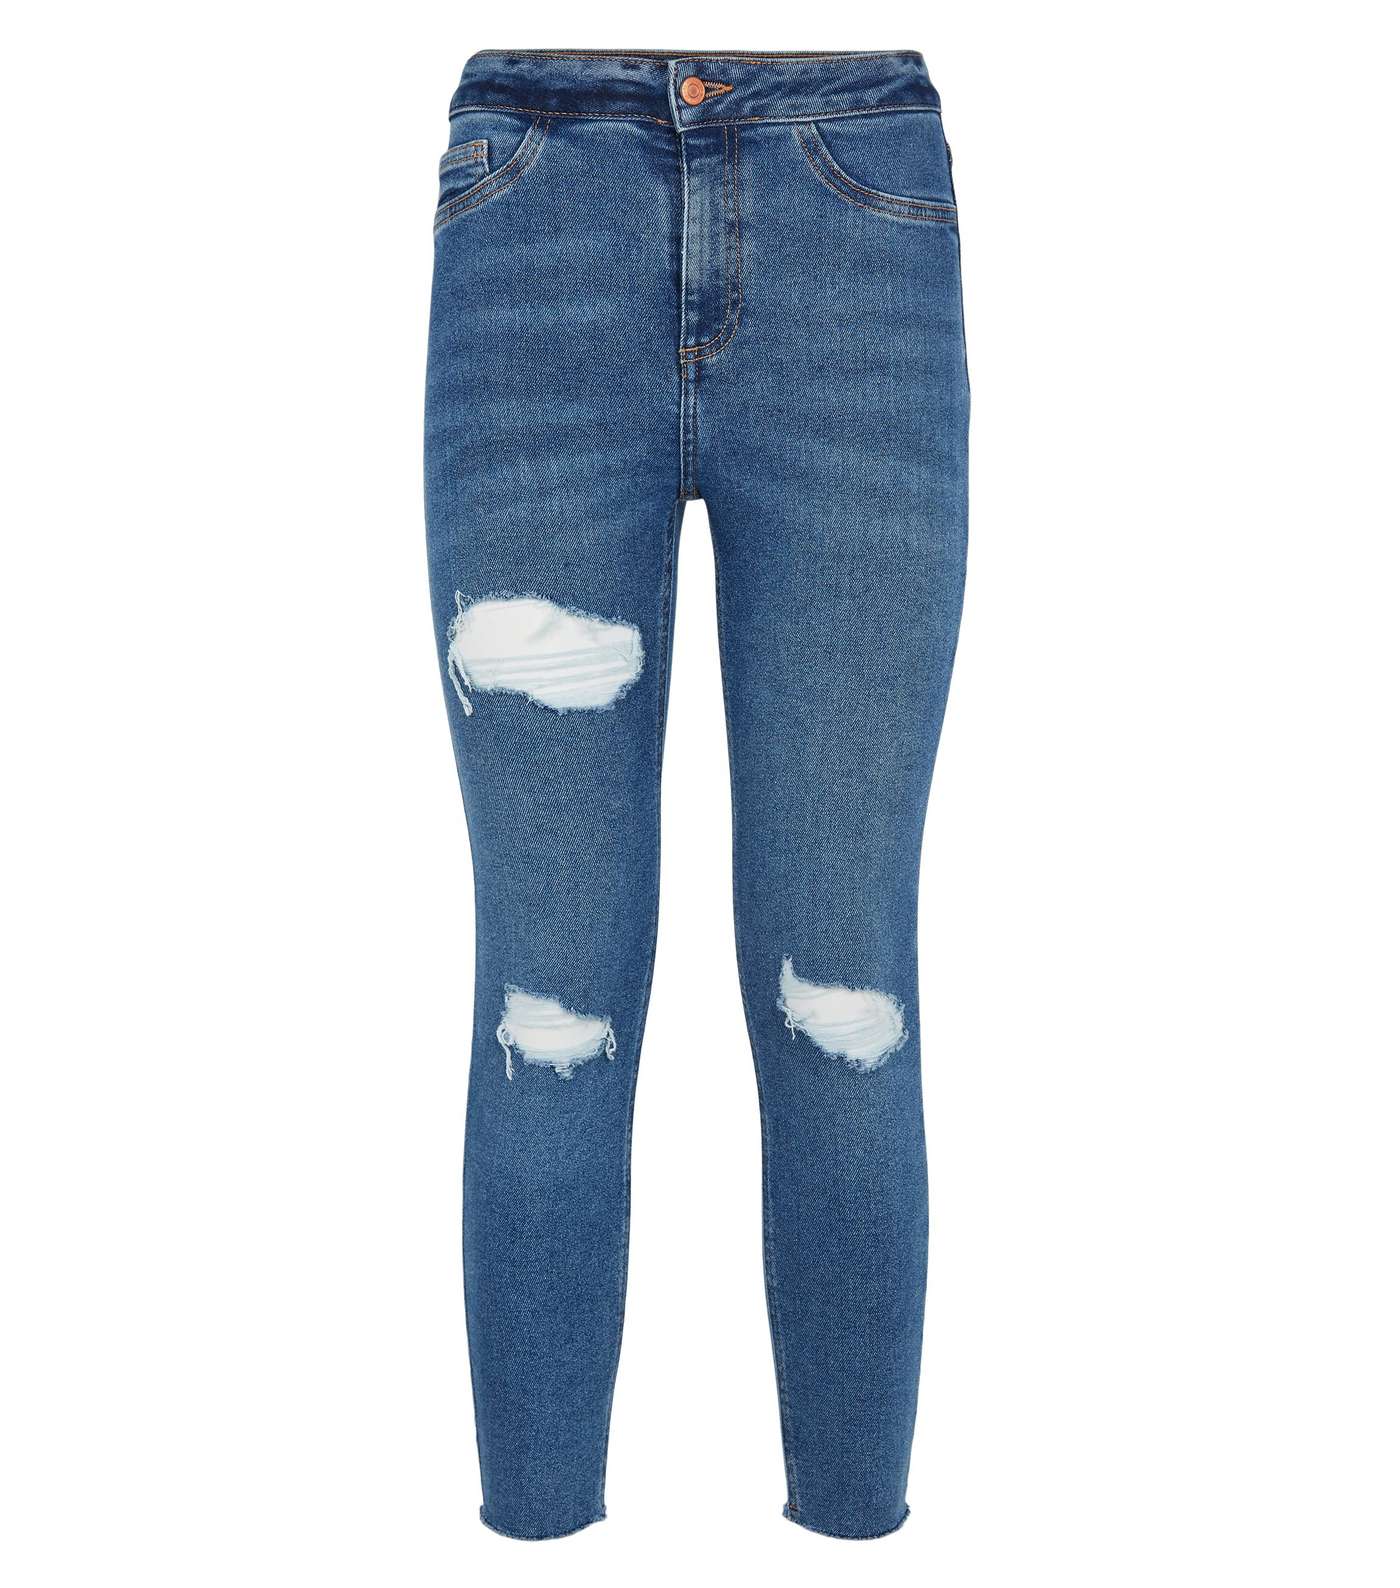 Petite Teal Ripped High Waist Super Skinny Jeans Image 4